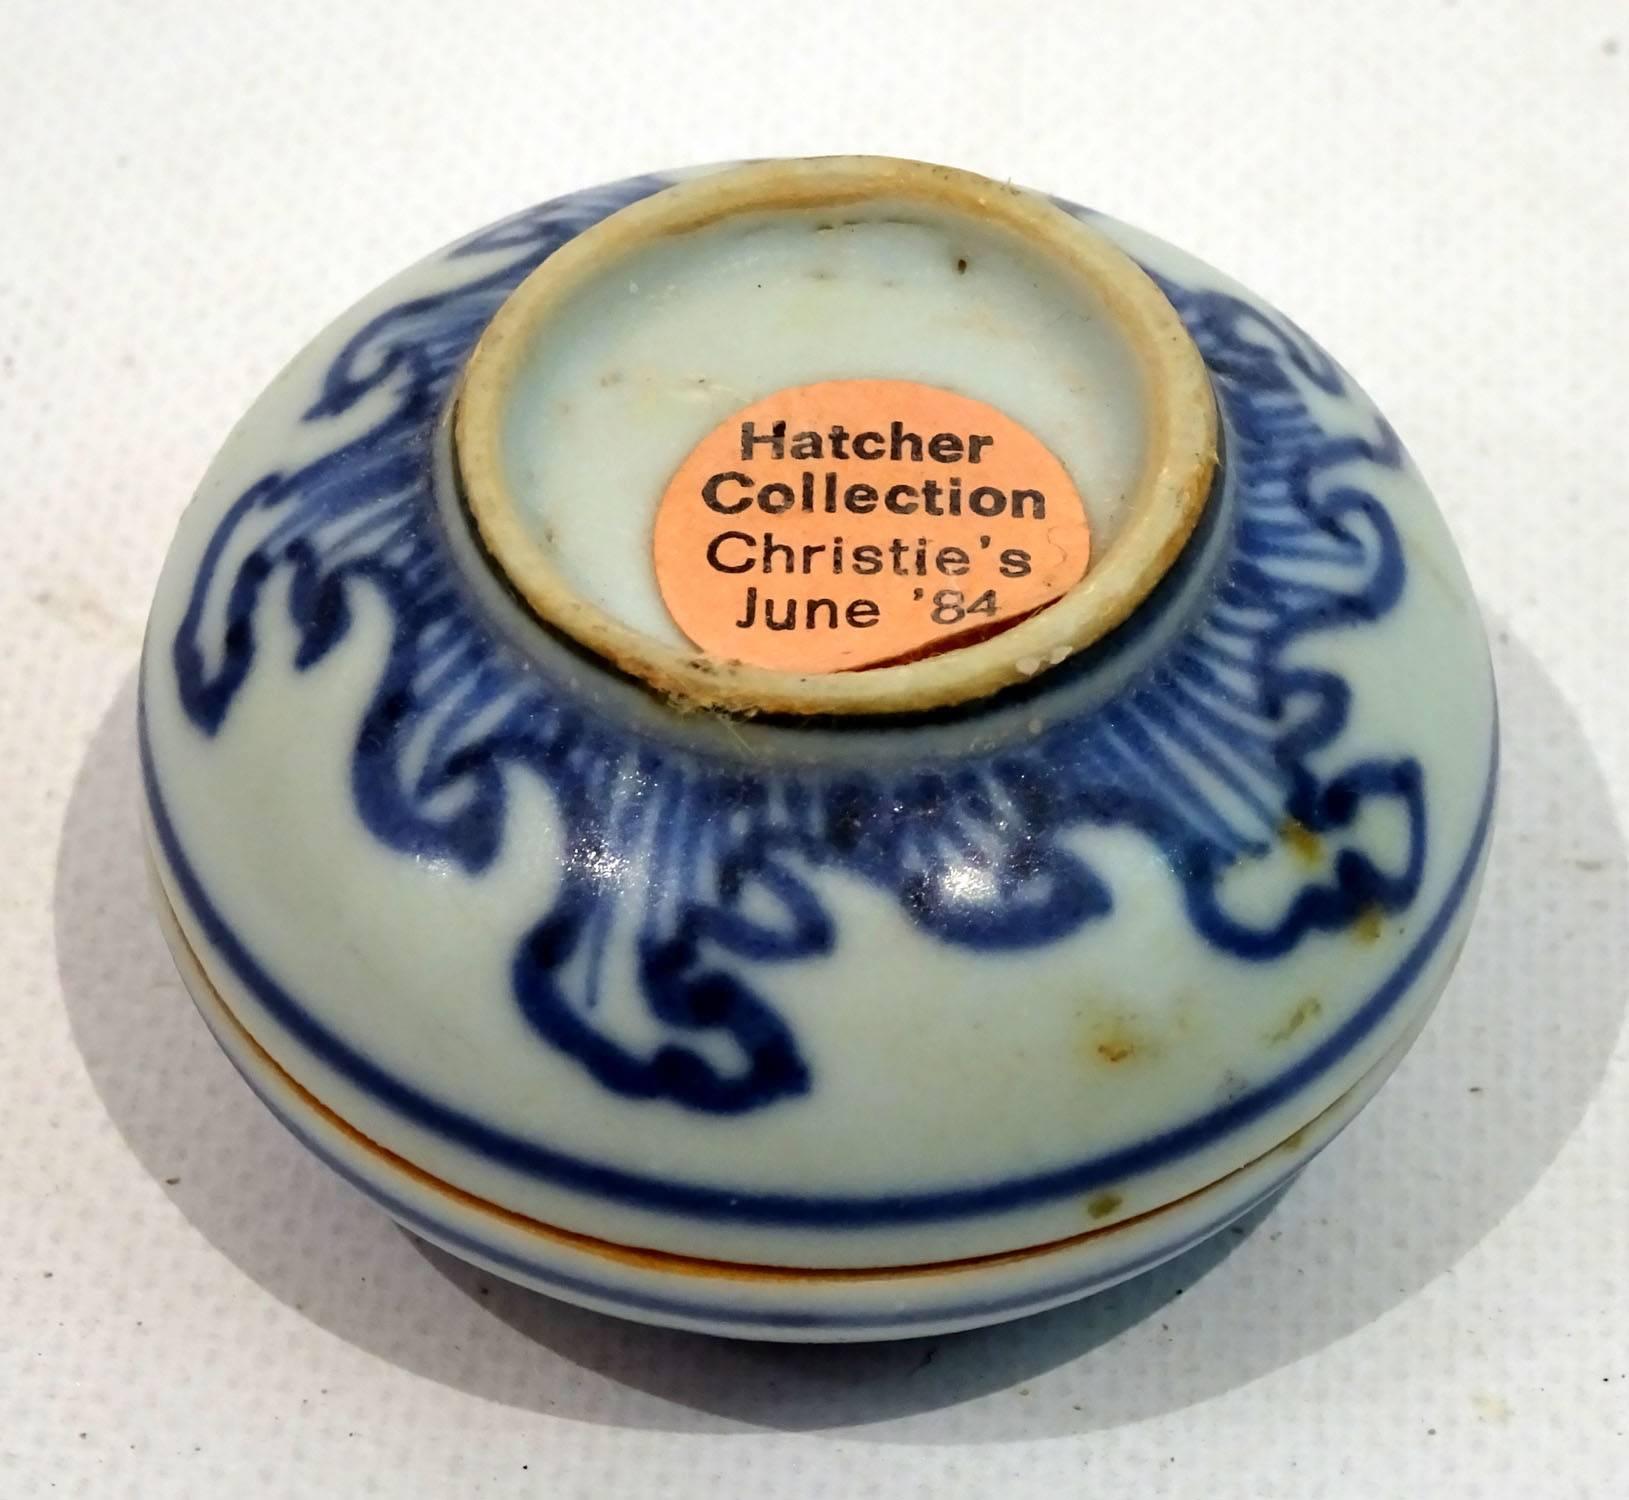 17th Century Chinese Porcelain Box with Lid from The Hatcher Collection 5